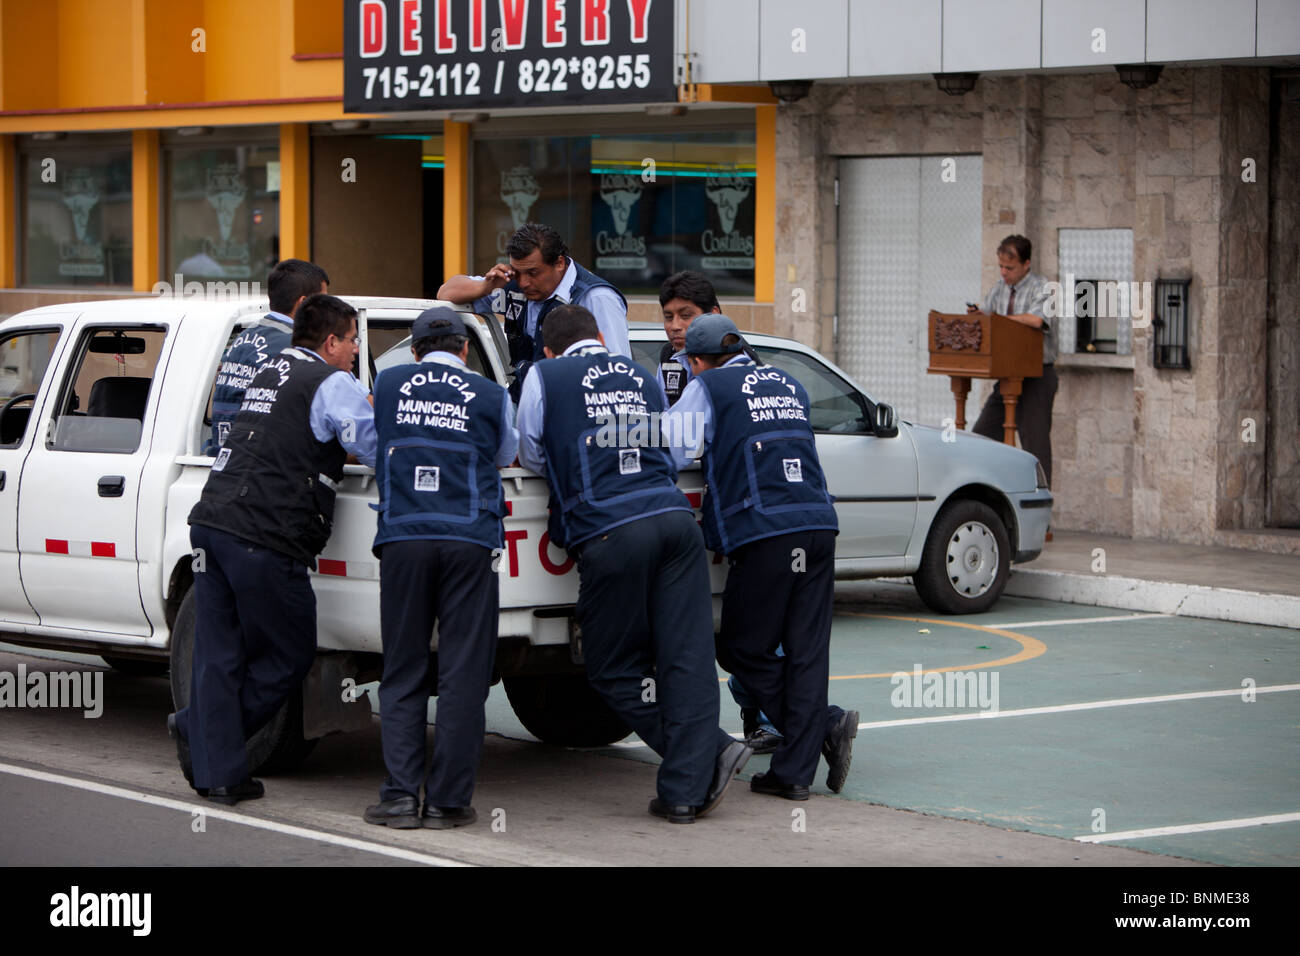 Policemen discussing business around a pickup in Lima, Peru Stock Photo